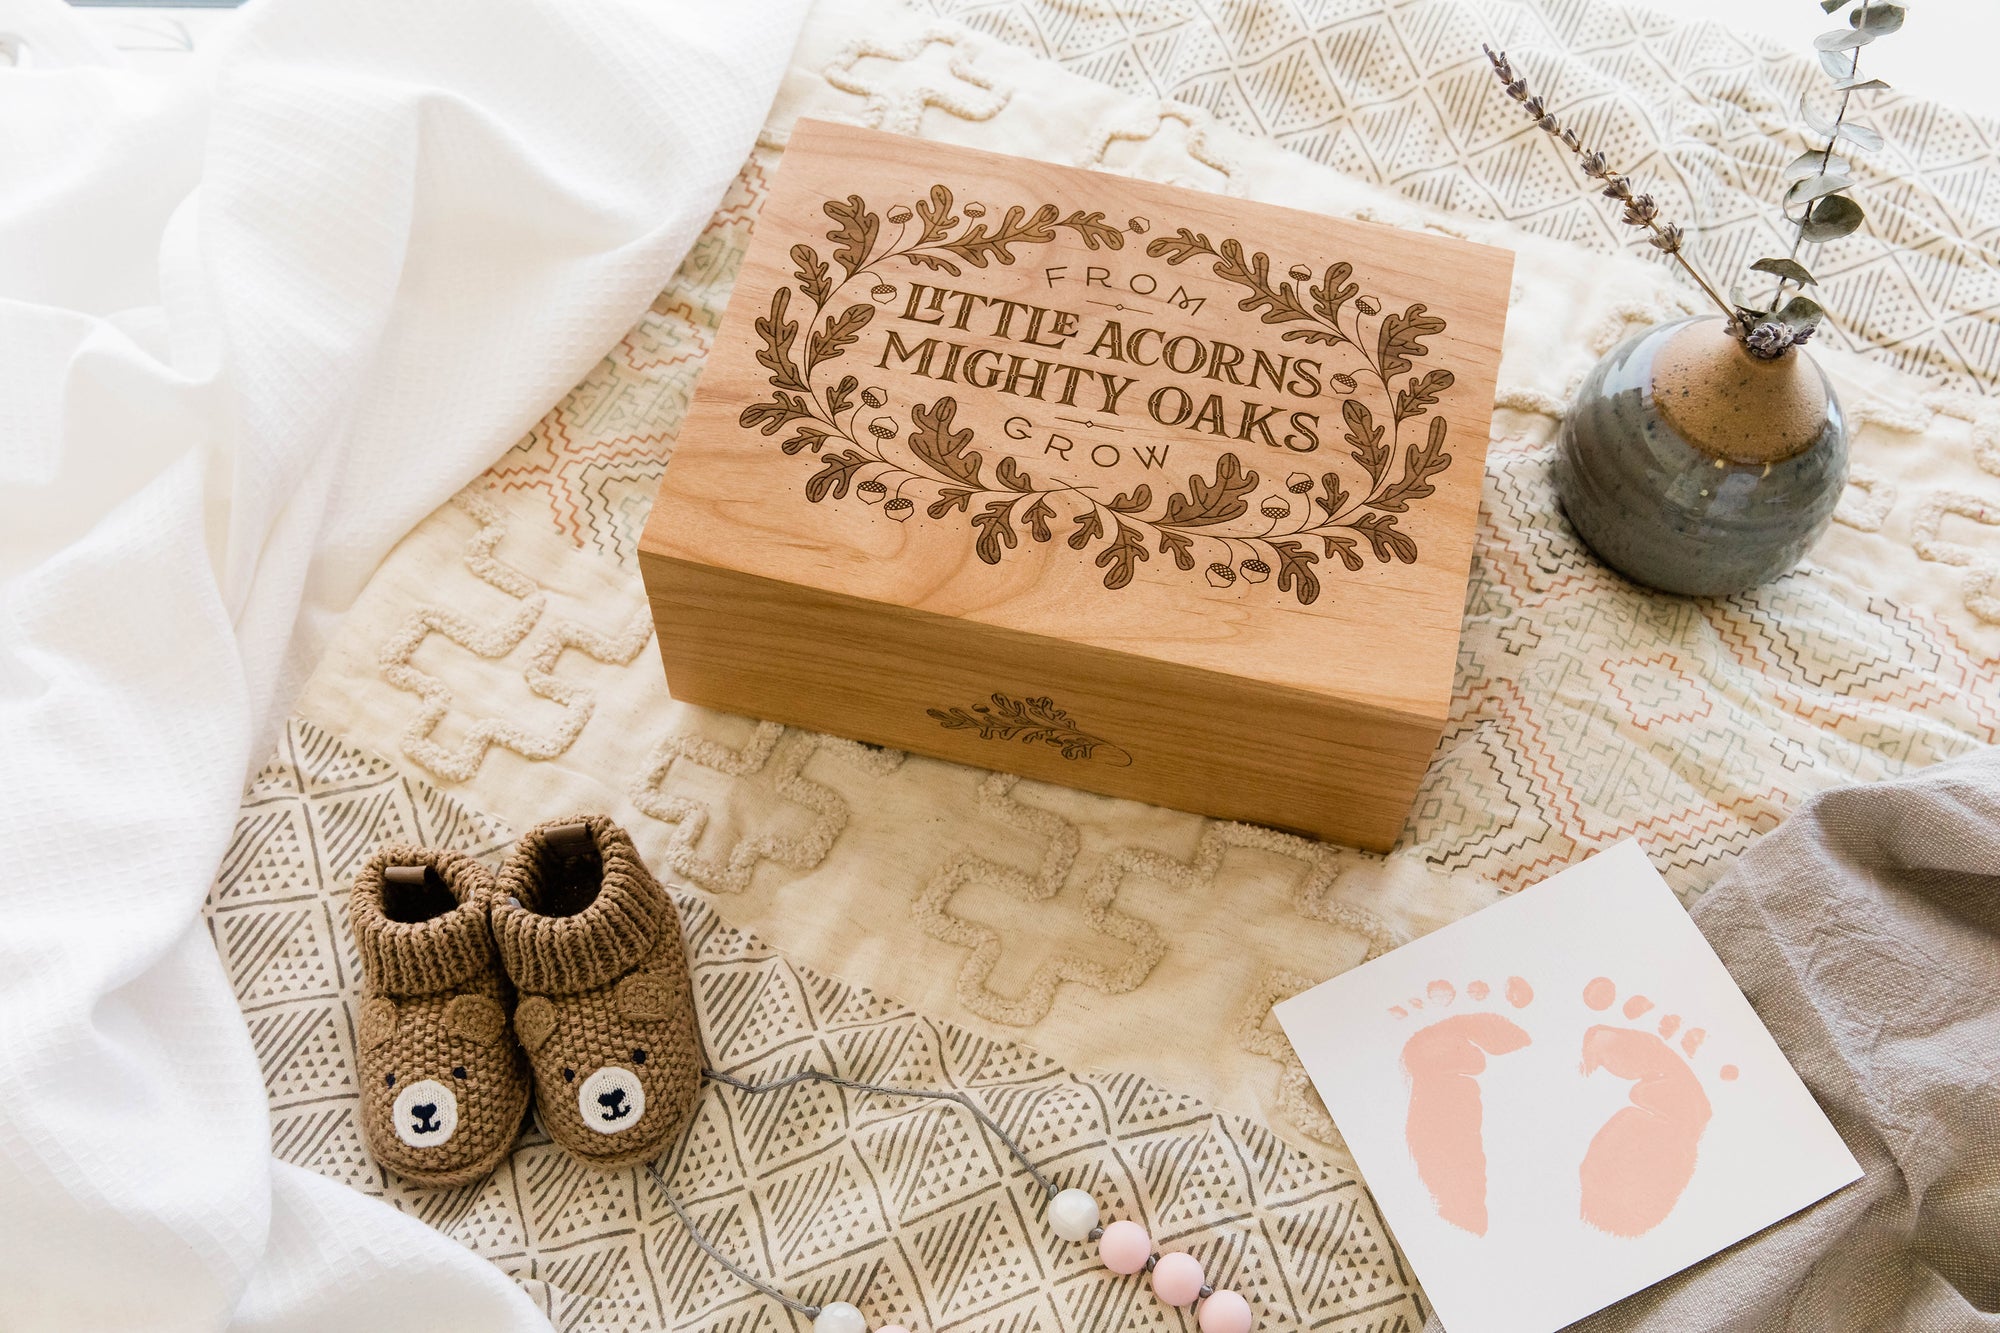 15 Must Save Items for Your Baby’s Keepsake Box